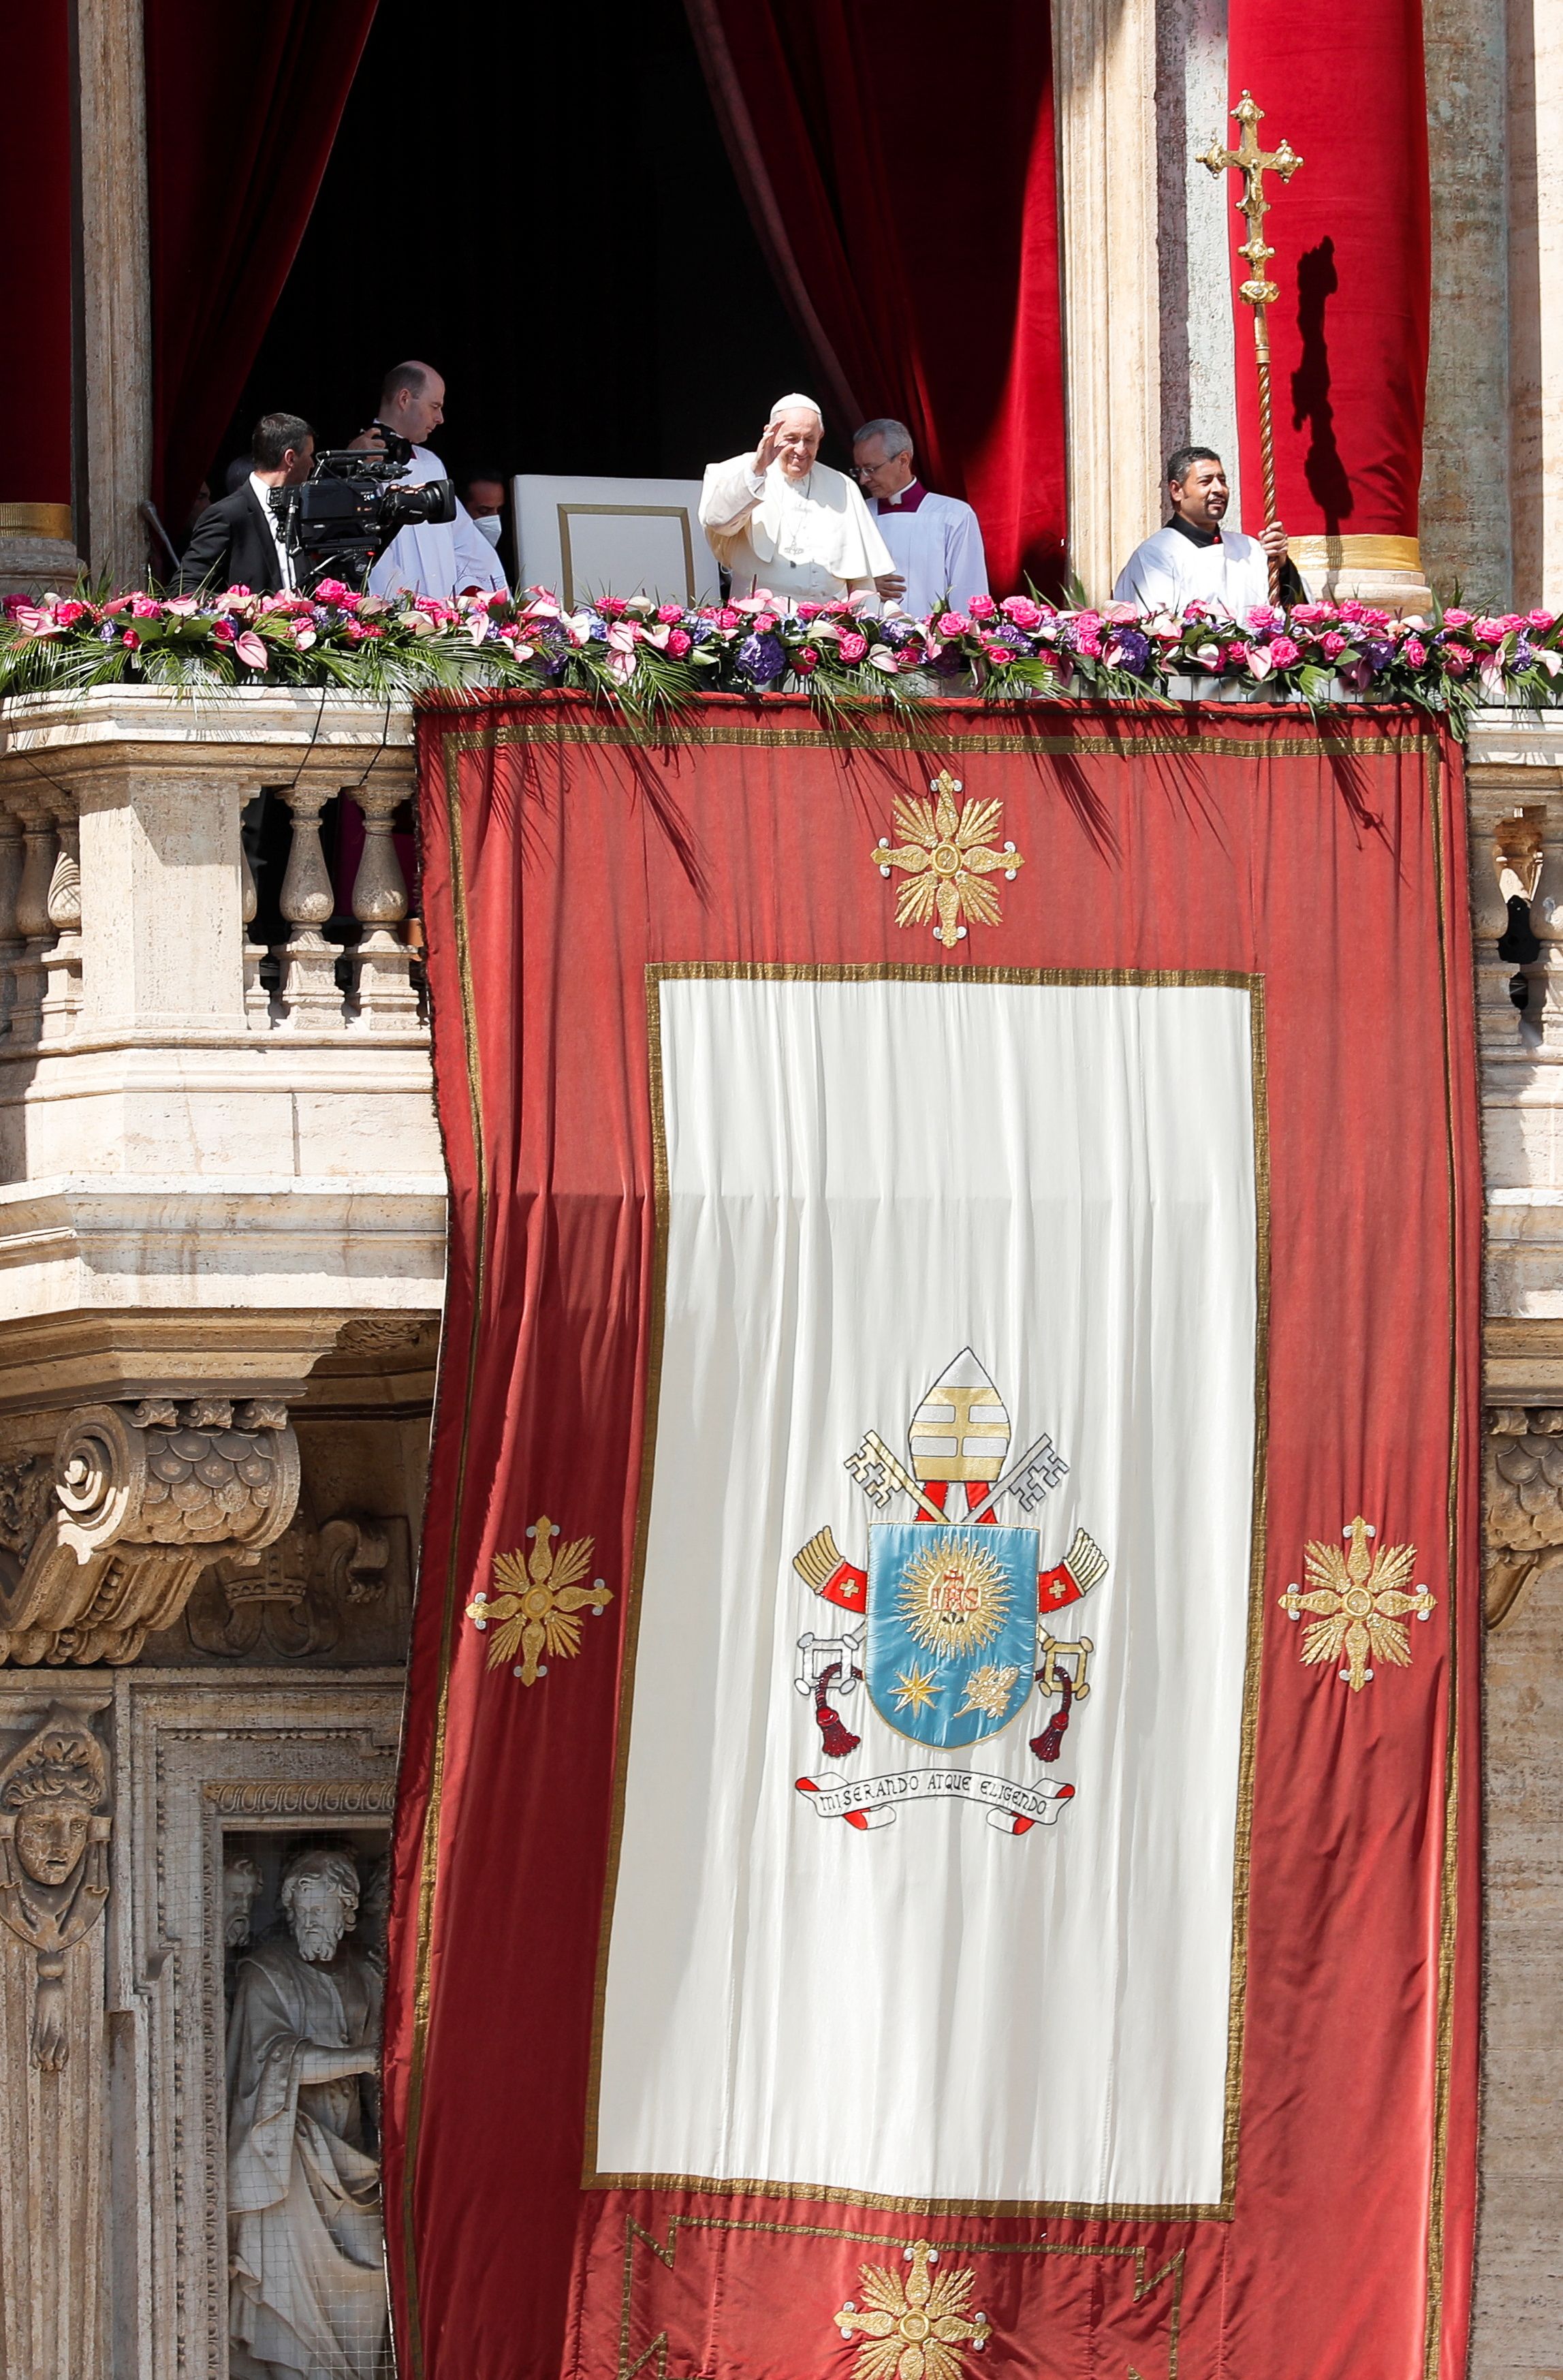 Pope Francis from the balcony overlooking St. Peter's Square on Easter Sunday